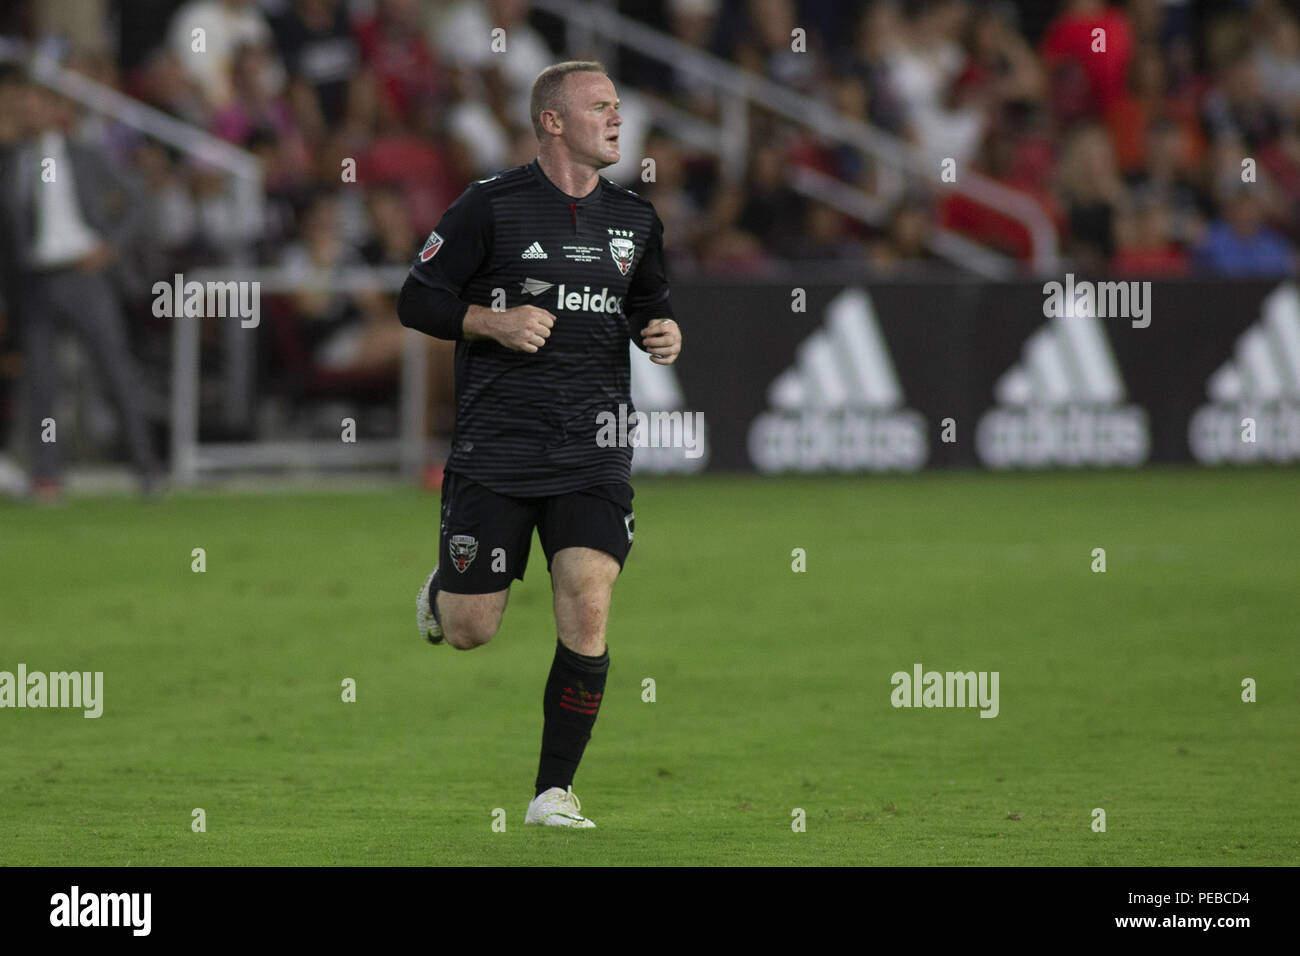 Washington, District of Columbia, USA. 14th July, 2018. D.C. United forward Wayne Rooney (9) runs during the game between D.C. United and Vancouver Whitecaps at Audi Filed in Washington, DC on July 14, 2018. D.C. This is D.C. United's first game at Audi Field. Credit: Alex Edelman/ZUMA Wire/Alamy Live News Stock Photo